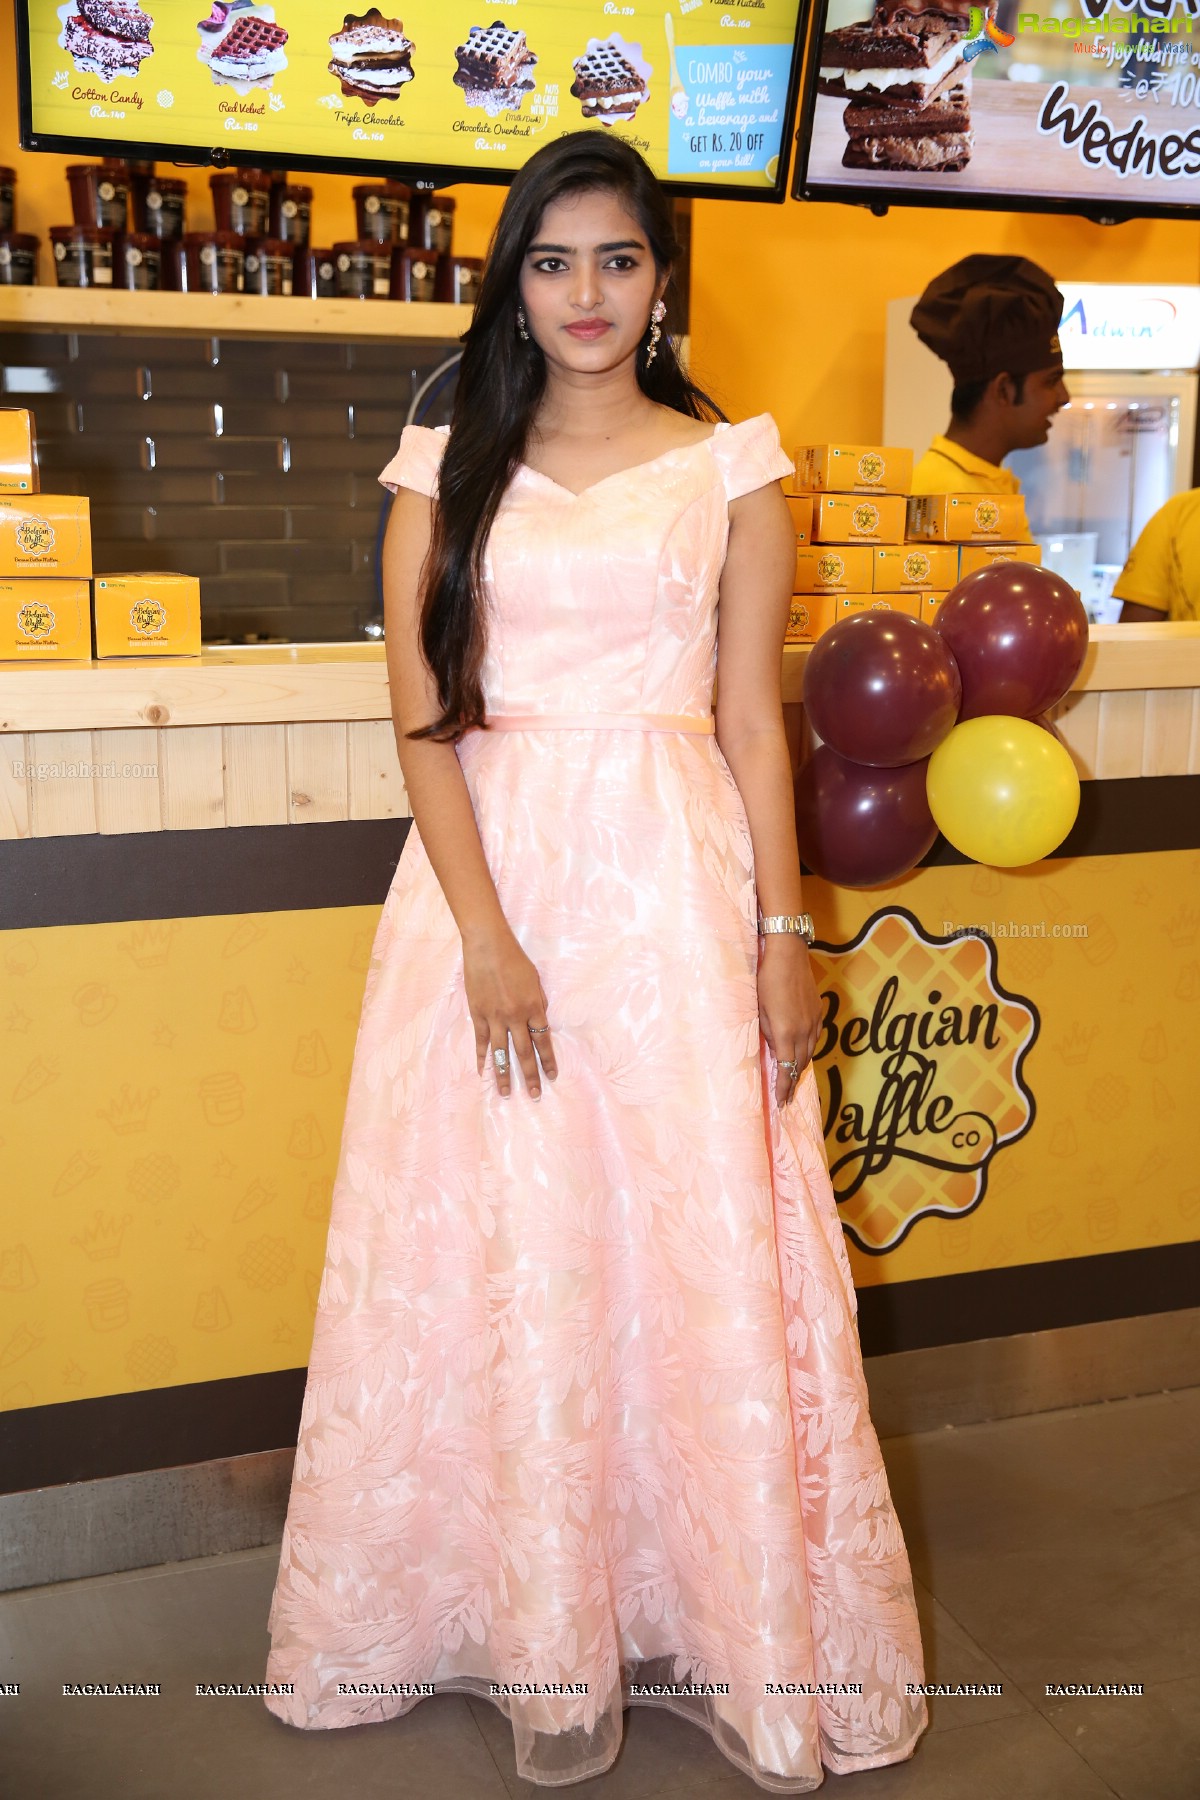 Grand Launch of The Belgian Waffle at Road #36, Jubilee Hills, Hyderabad